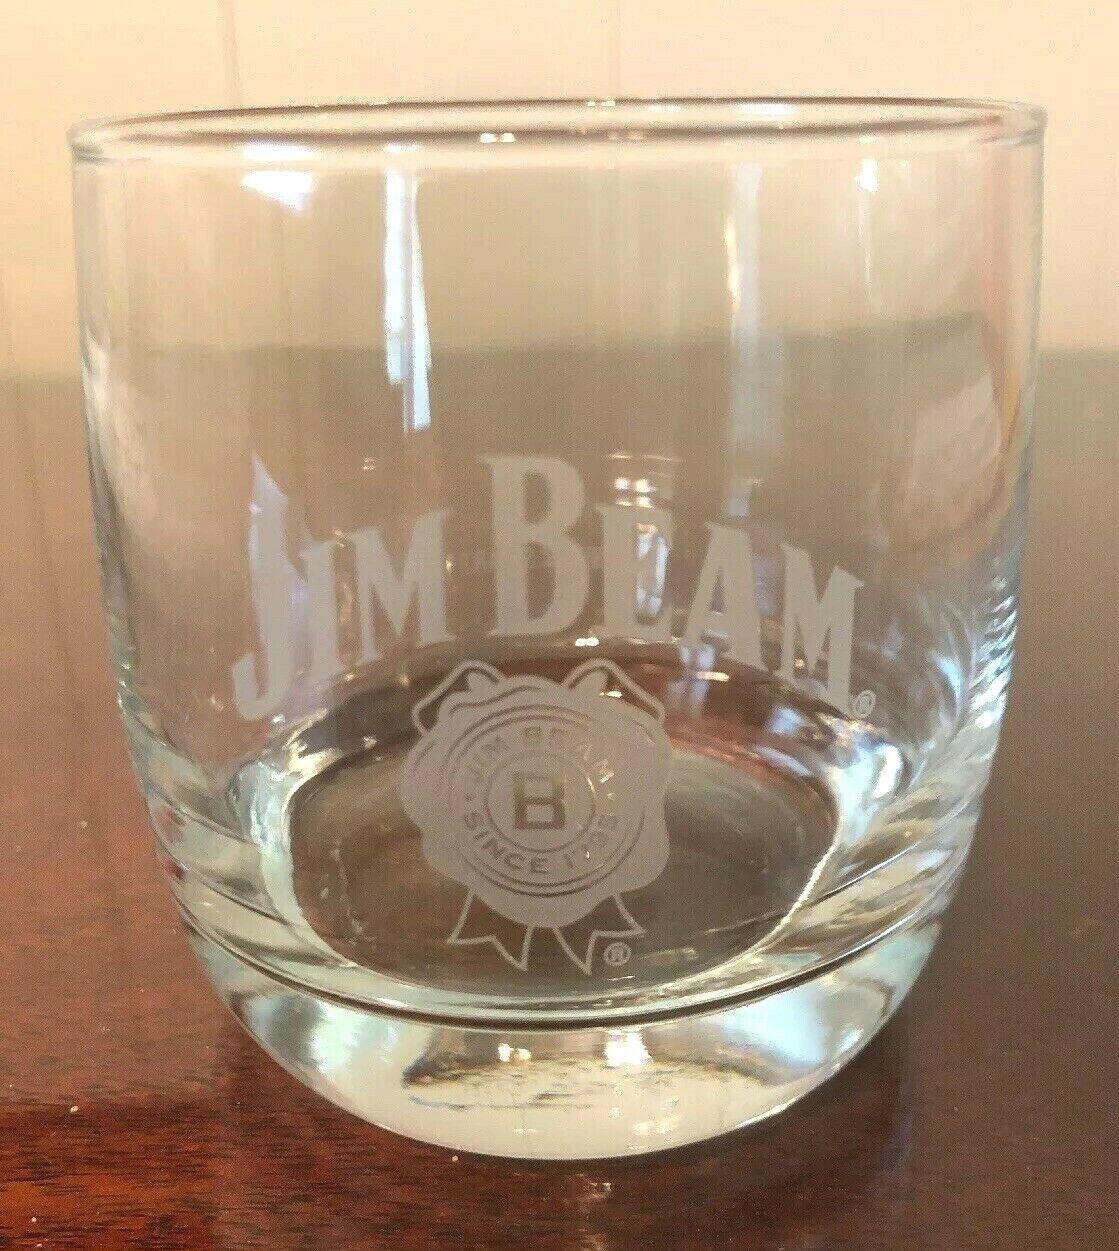 Jim Beam Round Etched Bourbon Whiskey Alcohol Bar Rocks Low Ball Glass 